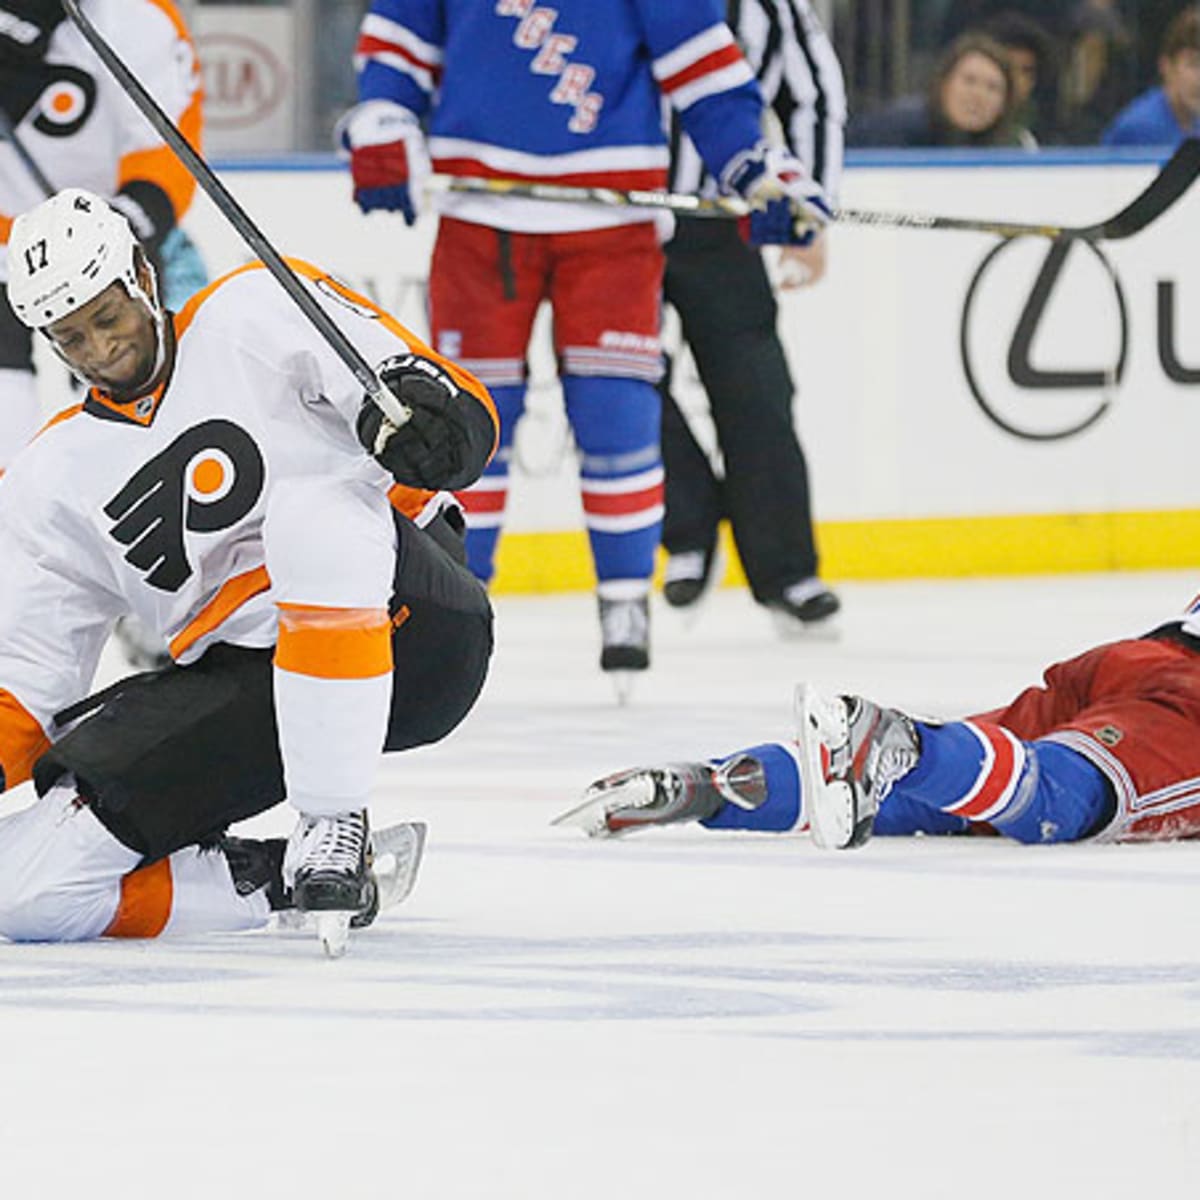 Ducks struggle to generate offense in 4-1 loss to Flyers - Los Angeles Times